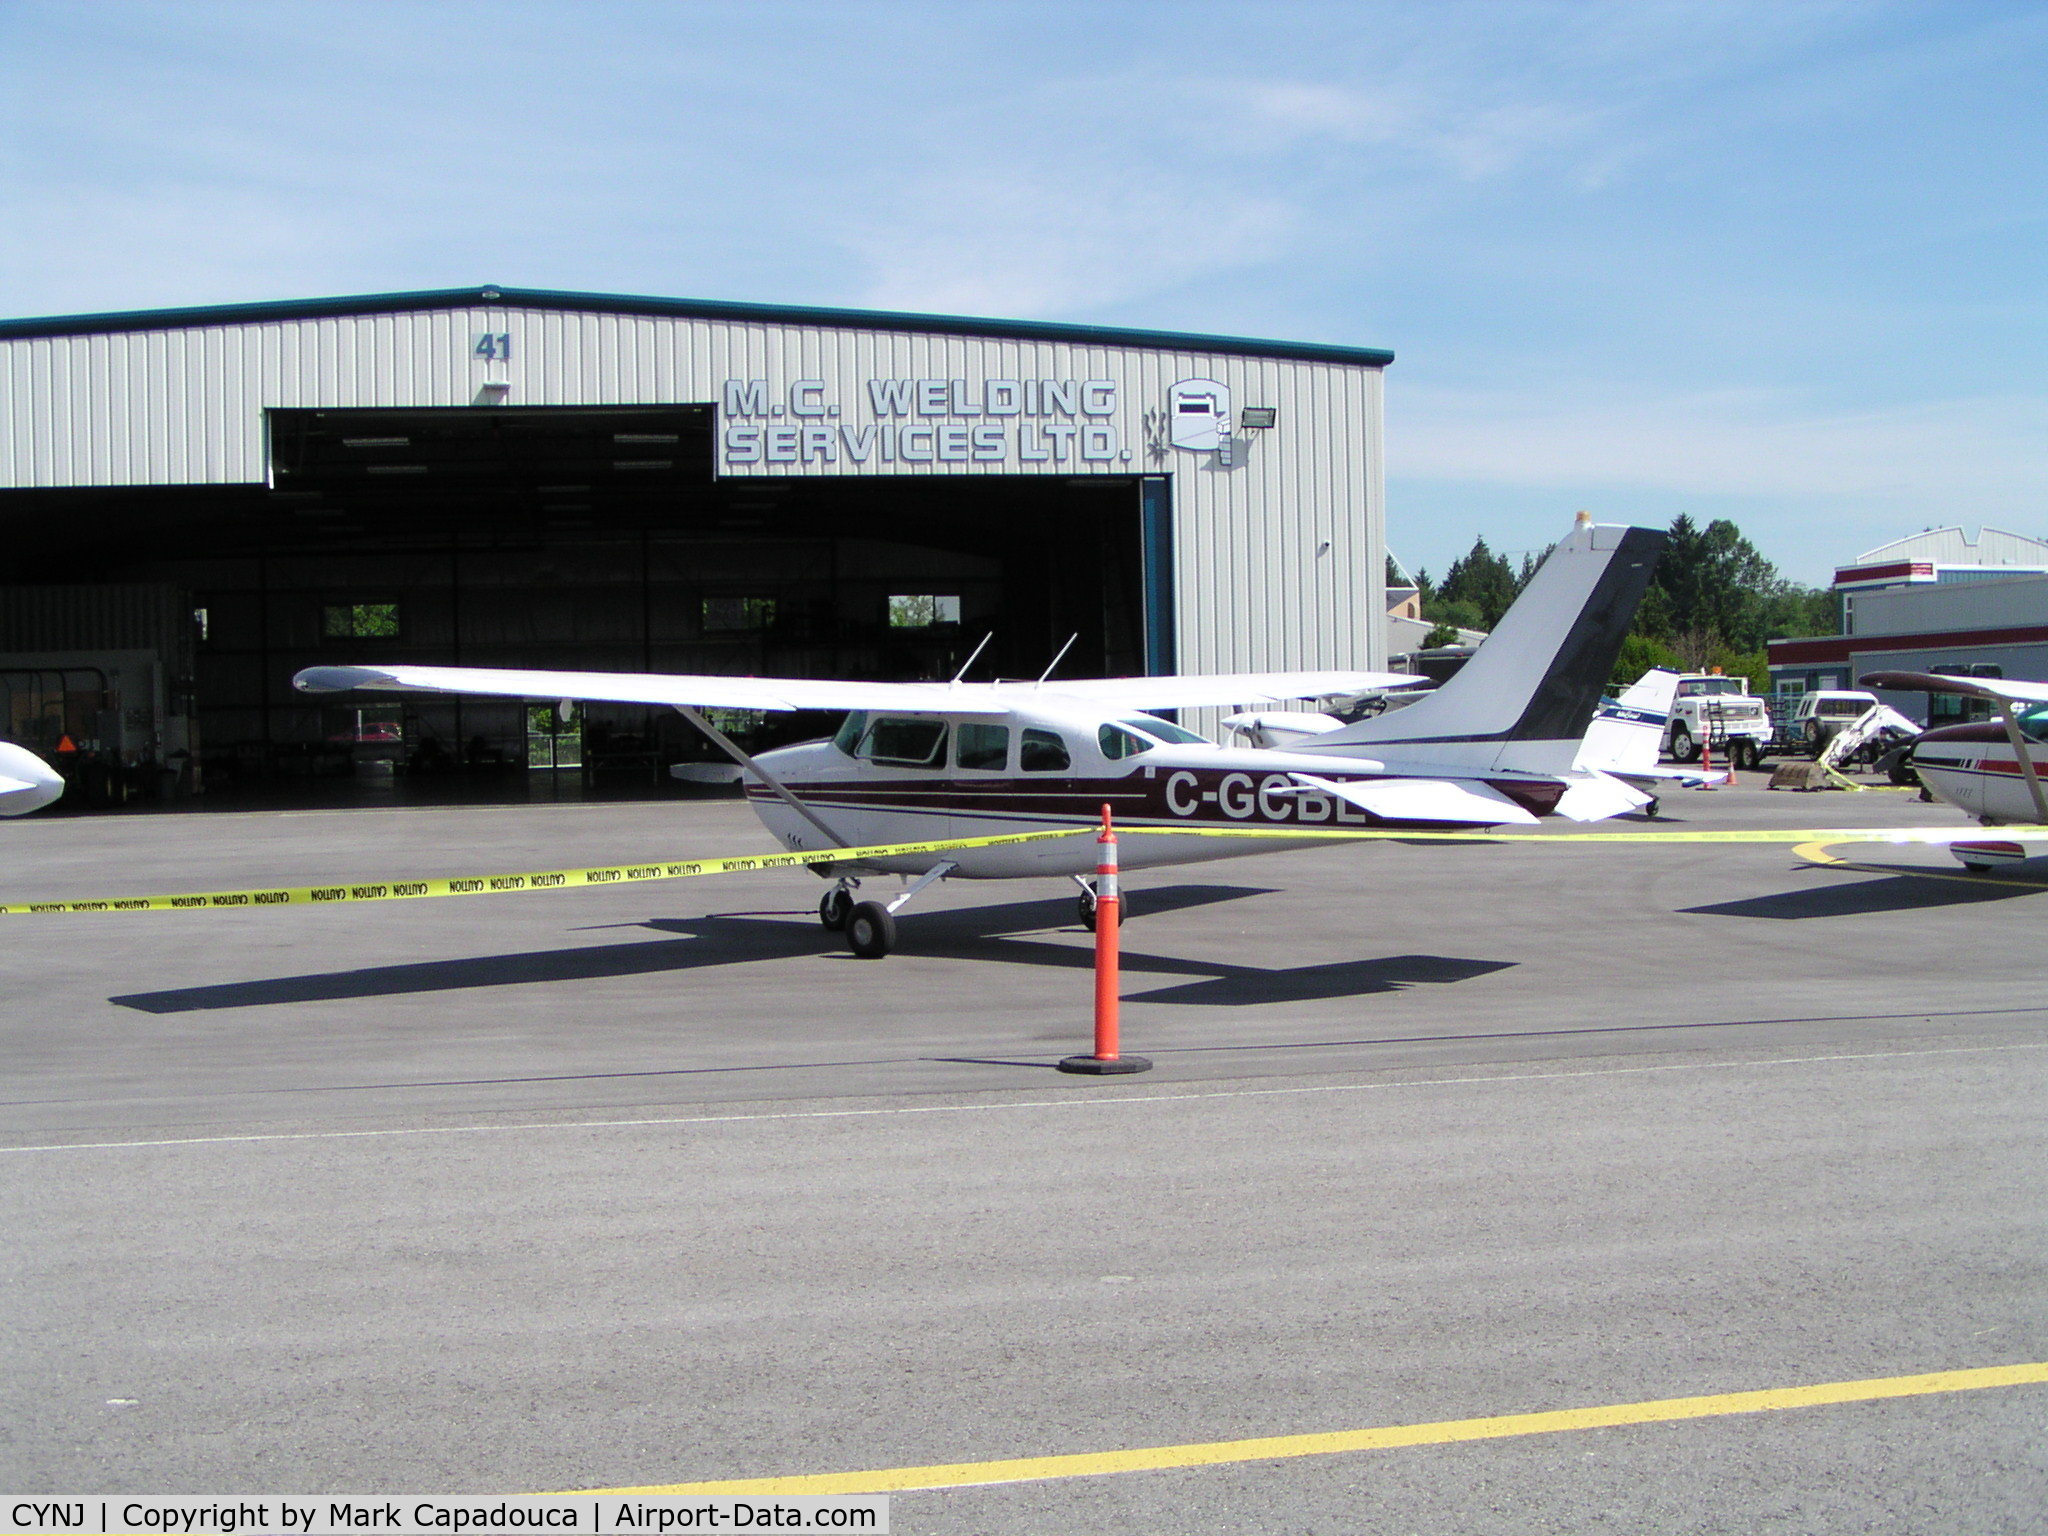 Langley Regional Airport, Langley, BC Canada (CYNJ) - M.C. Welding Services,  Hanger 41 Taxi way Gulf